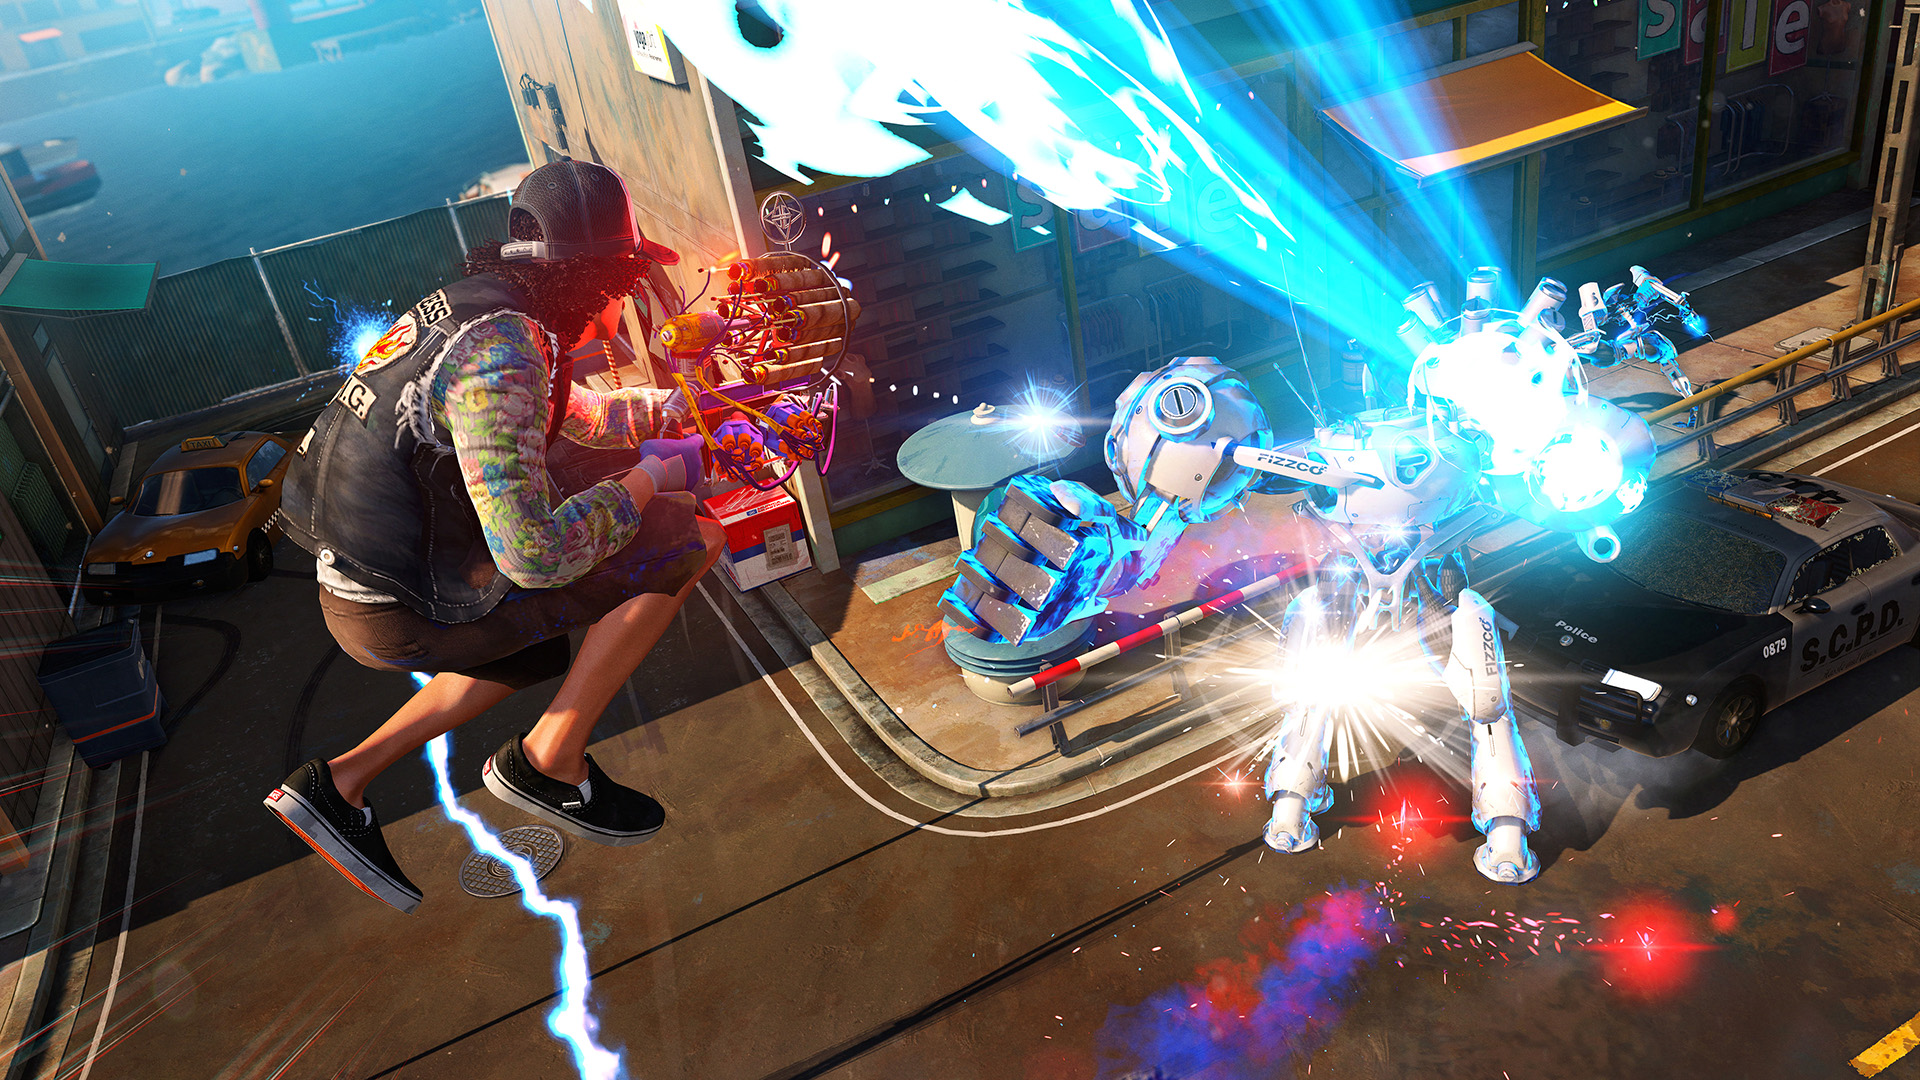 Sunset Overdrive Trademark Registered by Sony : r/PS5